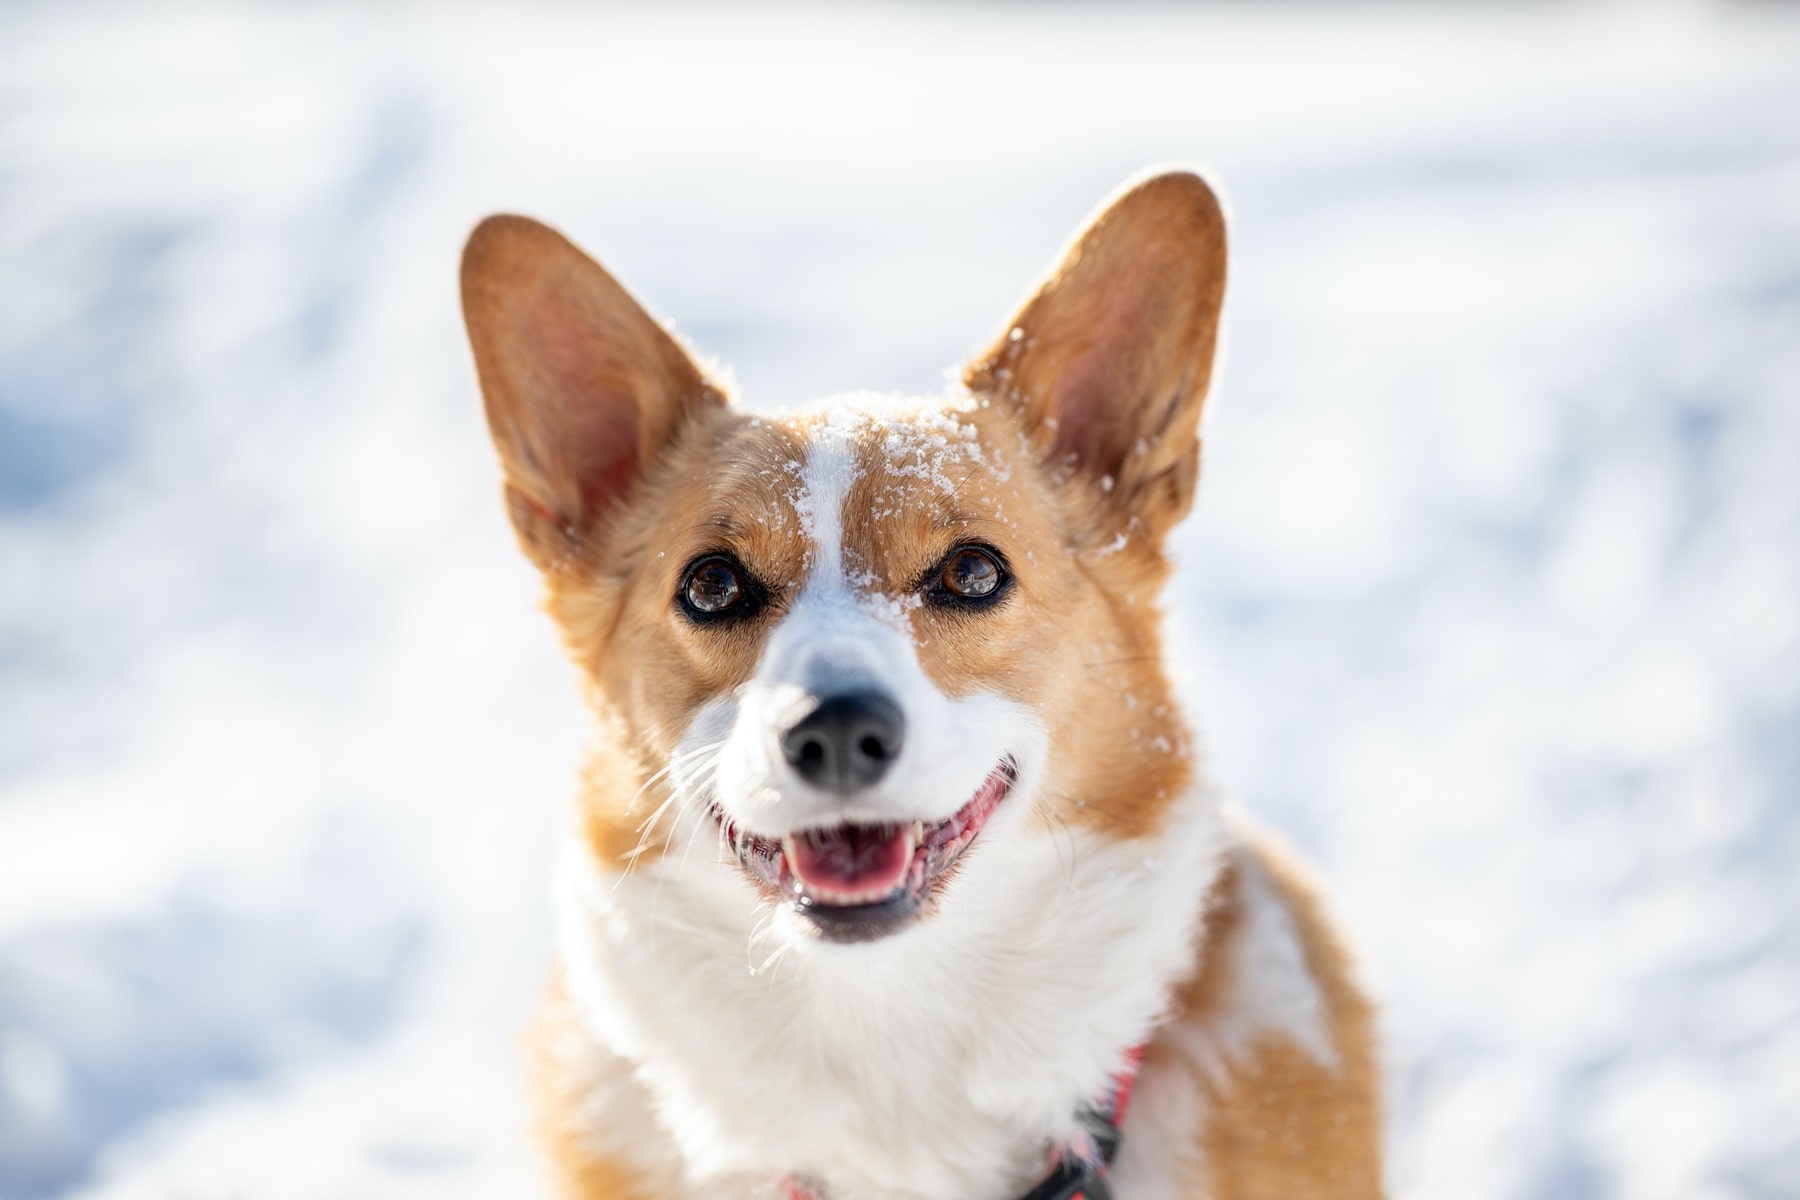 This happy corgi is smiling in the snow. They love going for winter walks. Just don't get hypothermia little friend. And don't get too cold.